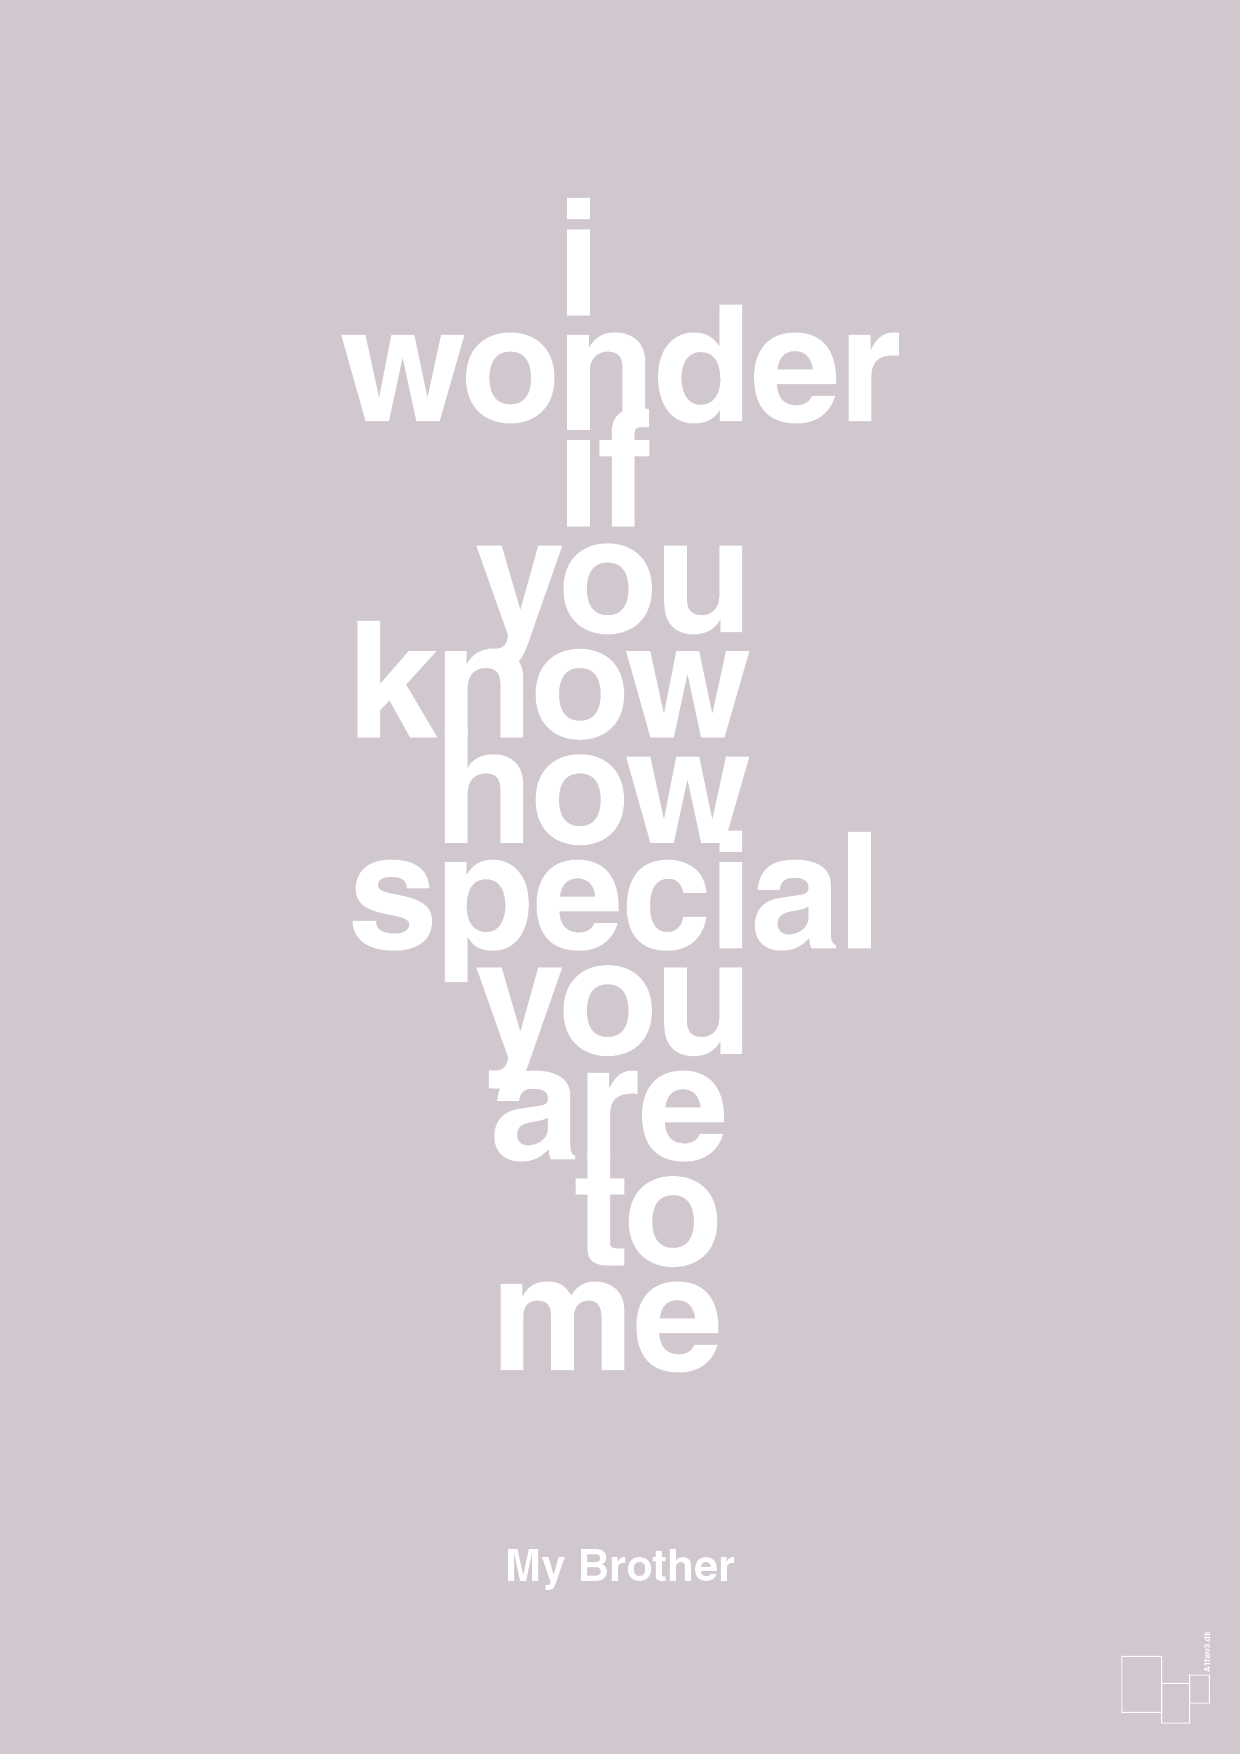 my brother - i wonder if you know how special you are to me - Plakat med Citater i Dusty Lilac